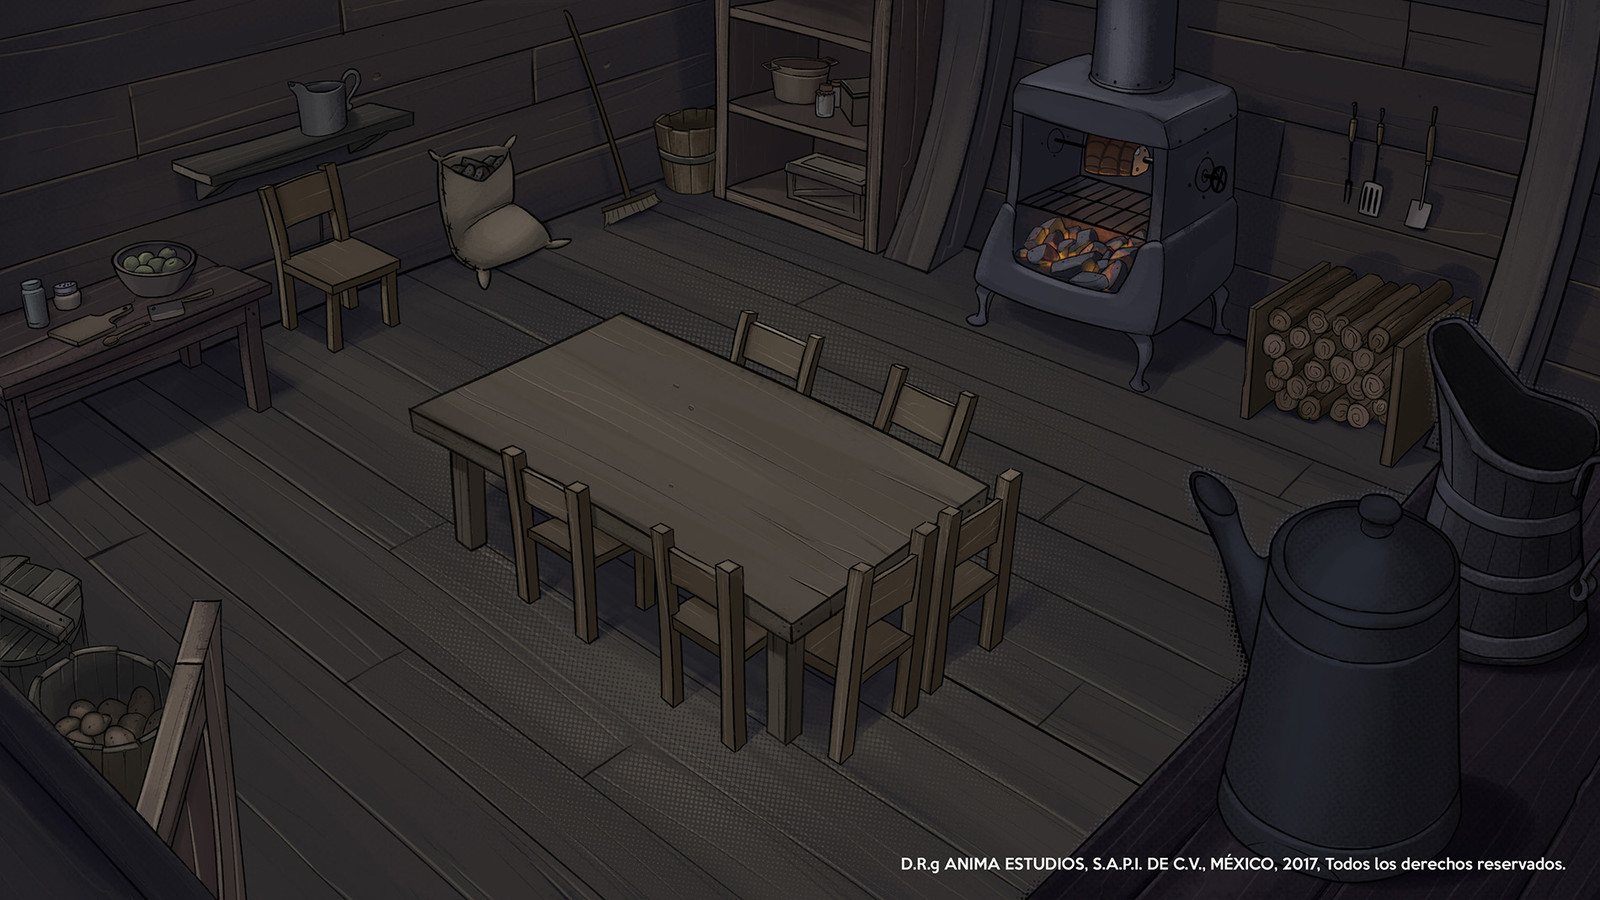 The kitchen inside the airship.